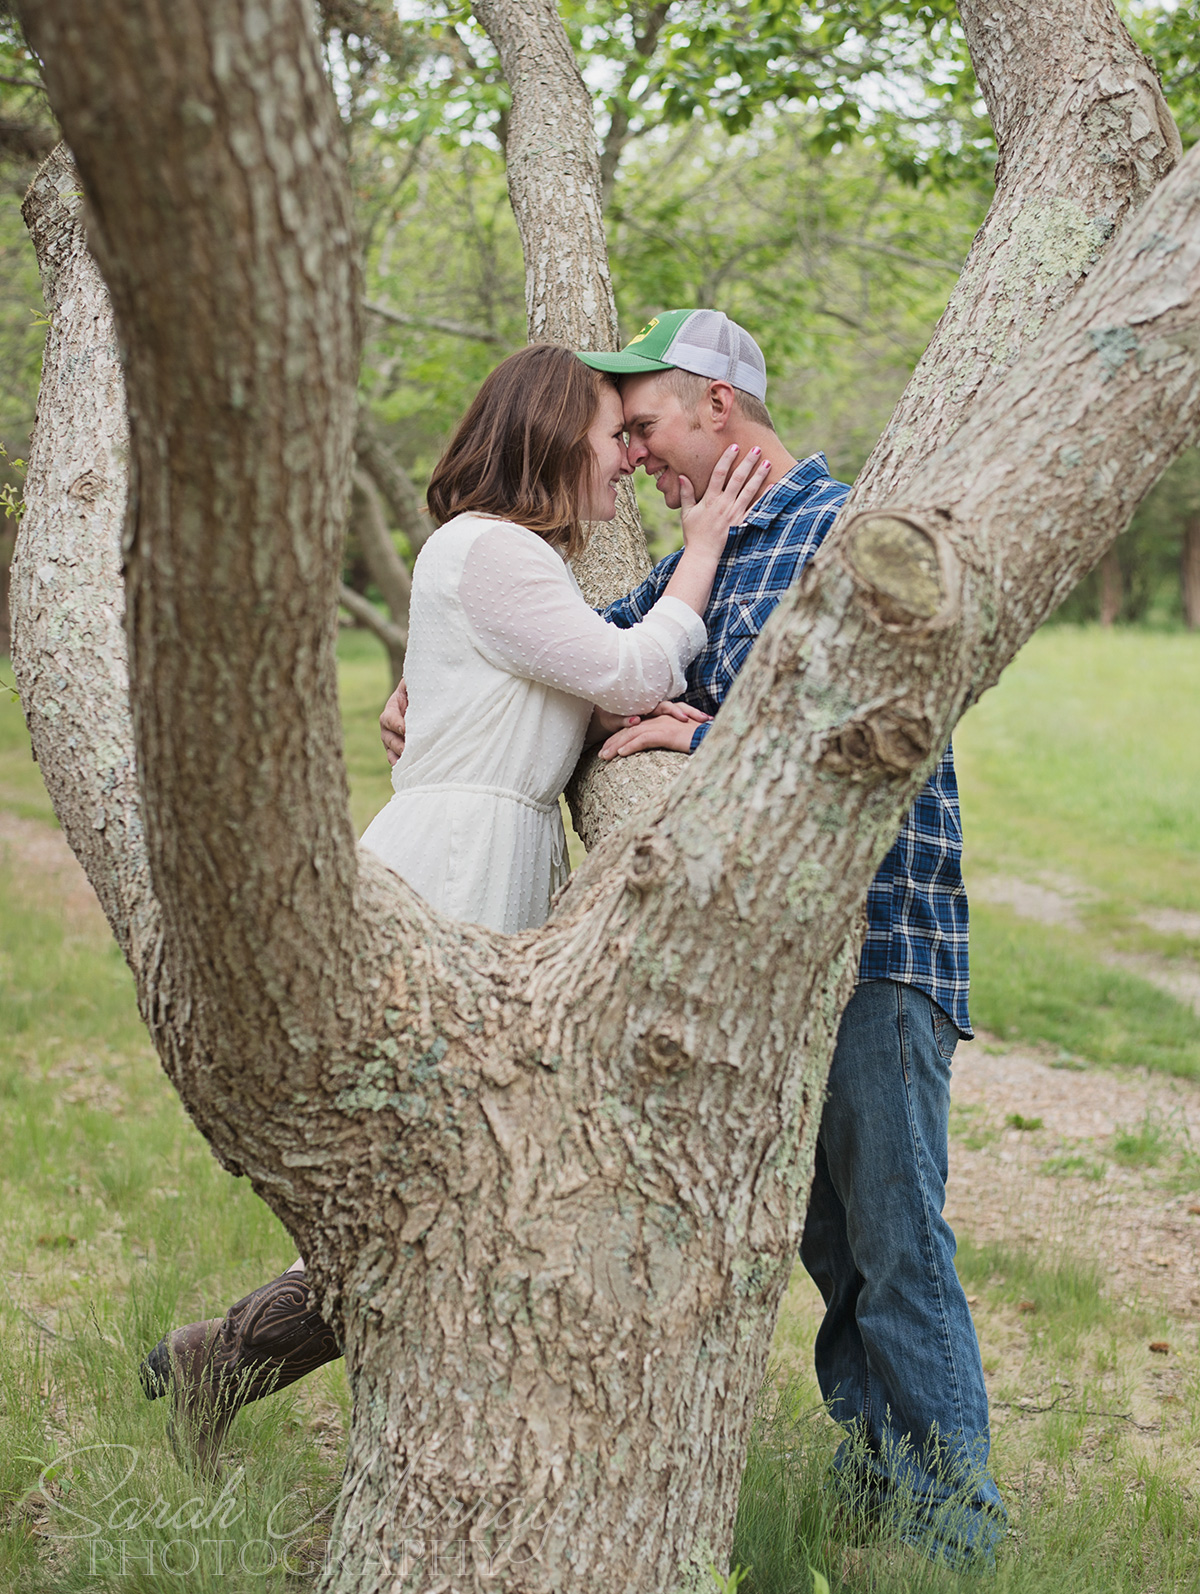 Bourne Farm Cape Cod Engagement Session in West Falmouth, Massachusetts - Sarah Murray Photography